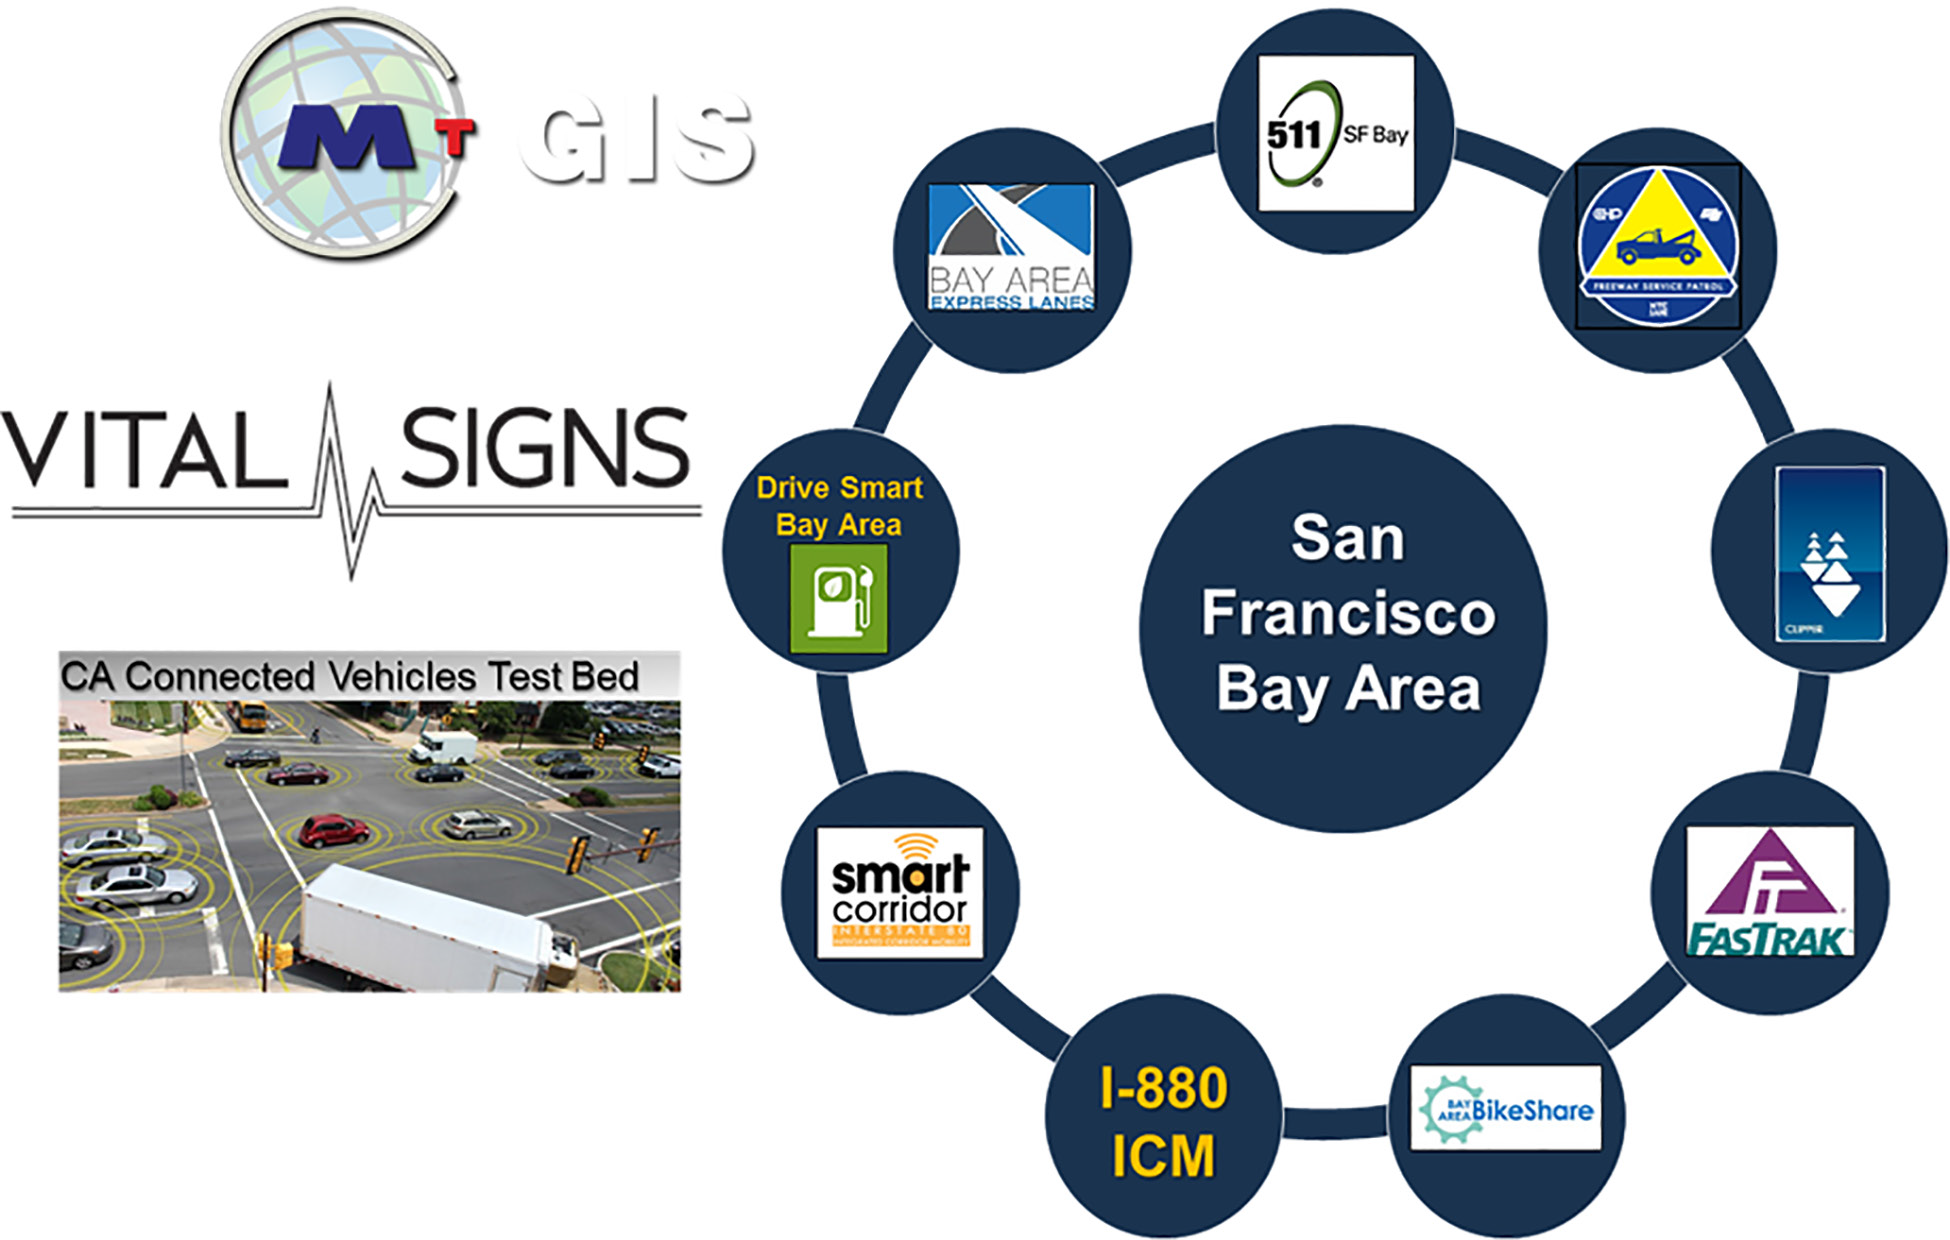 Figure 8. San Francisco Bay Area Operational Programs and Data Resources.  The image shows a logo for MtGIS in the upper left Corner.  Under that it has the words Vital Signs and then under that an image of an intersection with the vehicles having yellow rings around them and the words above the inset picture reading 'CA Connected Vehicles Test Bed'.  To the right is an inset image.  In the inner-most circle is the Words San Francisco Bay Area.  Circling this inner circle and connecting in a clockwise direction are 1) 511 SF Bay, 2) A tow truck image with a yellow triangle behind it, 3) an icon of stacked triangles, 4) FastTrak, 5) BikeShare 6) I-880 ICM, 7) smart corridor, 8) Drive Smart Bay Area with white gas pump on green background, 9) Bay Area Express Lanes.